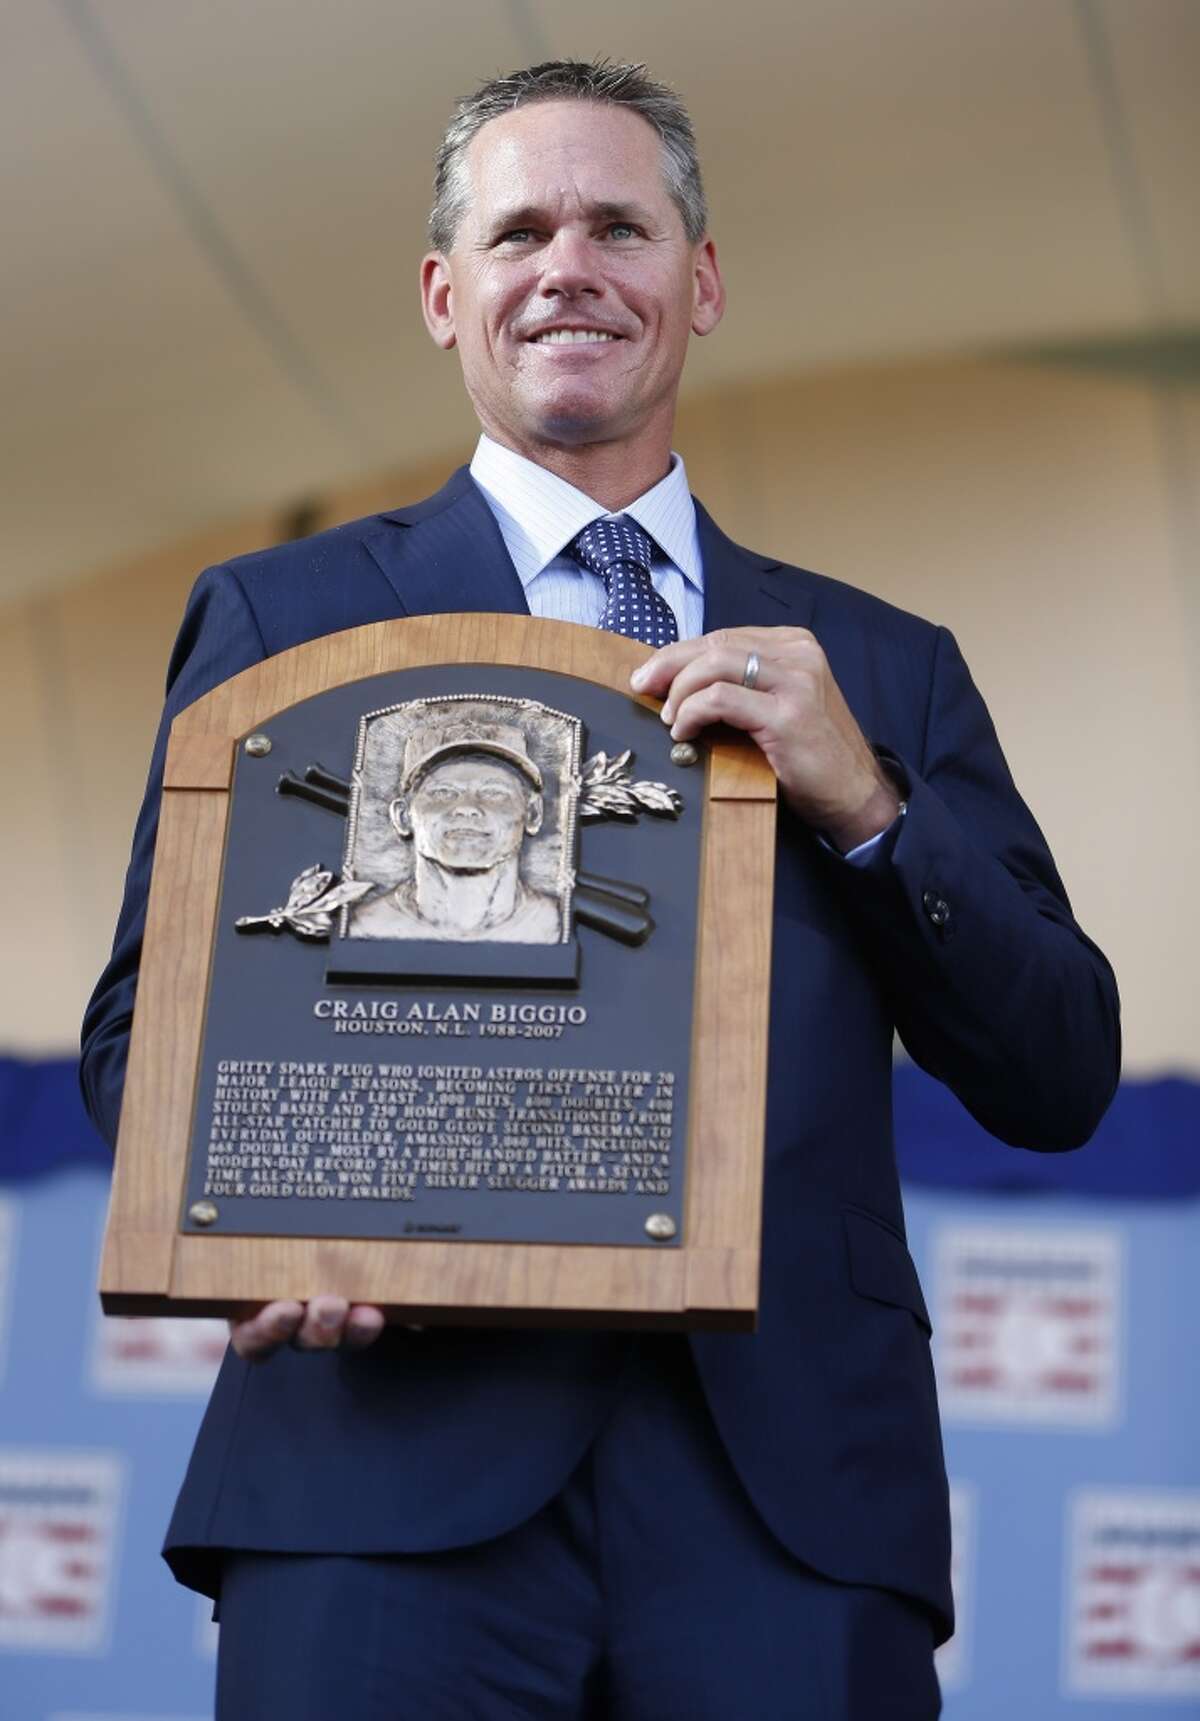 19. Craig Biggio's Hall of Fame induction Craig Biggio was inducted into the National Baseball Hall of Fame and Museum in Cooperstown, N.Y., on July 26, becoming the first player to have an Astros cap on his Hall of Fame plaque.